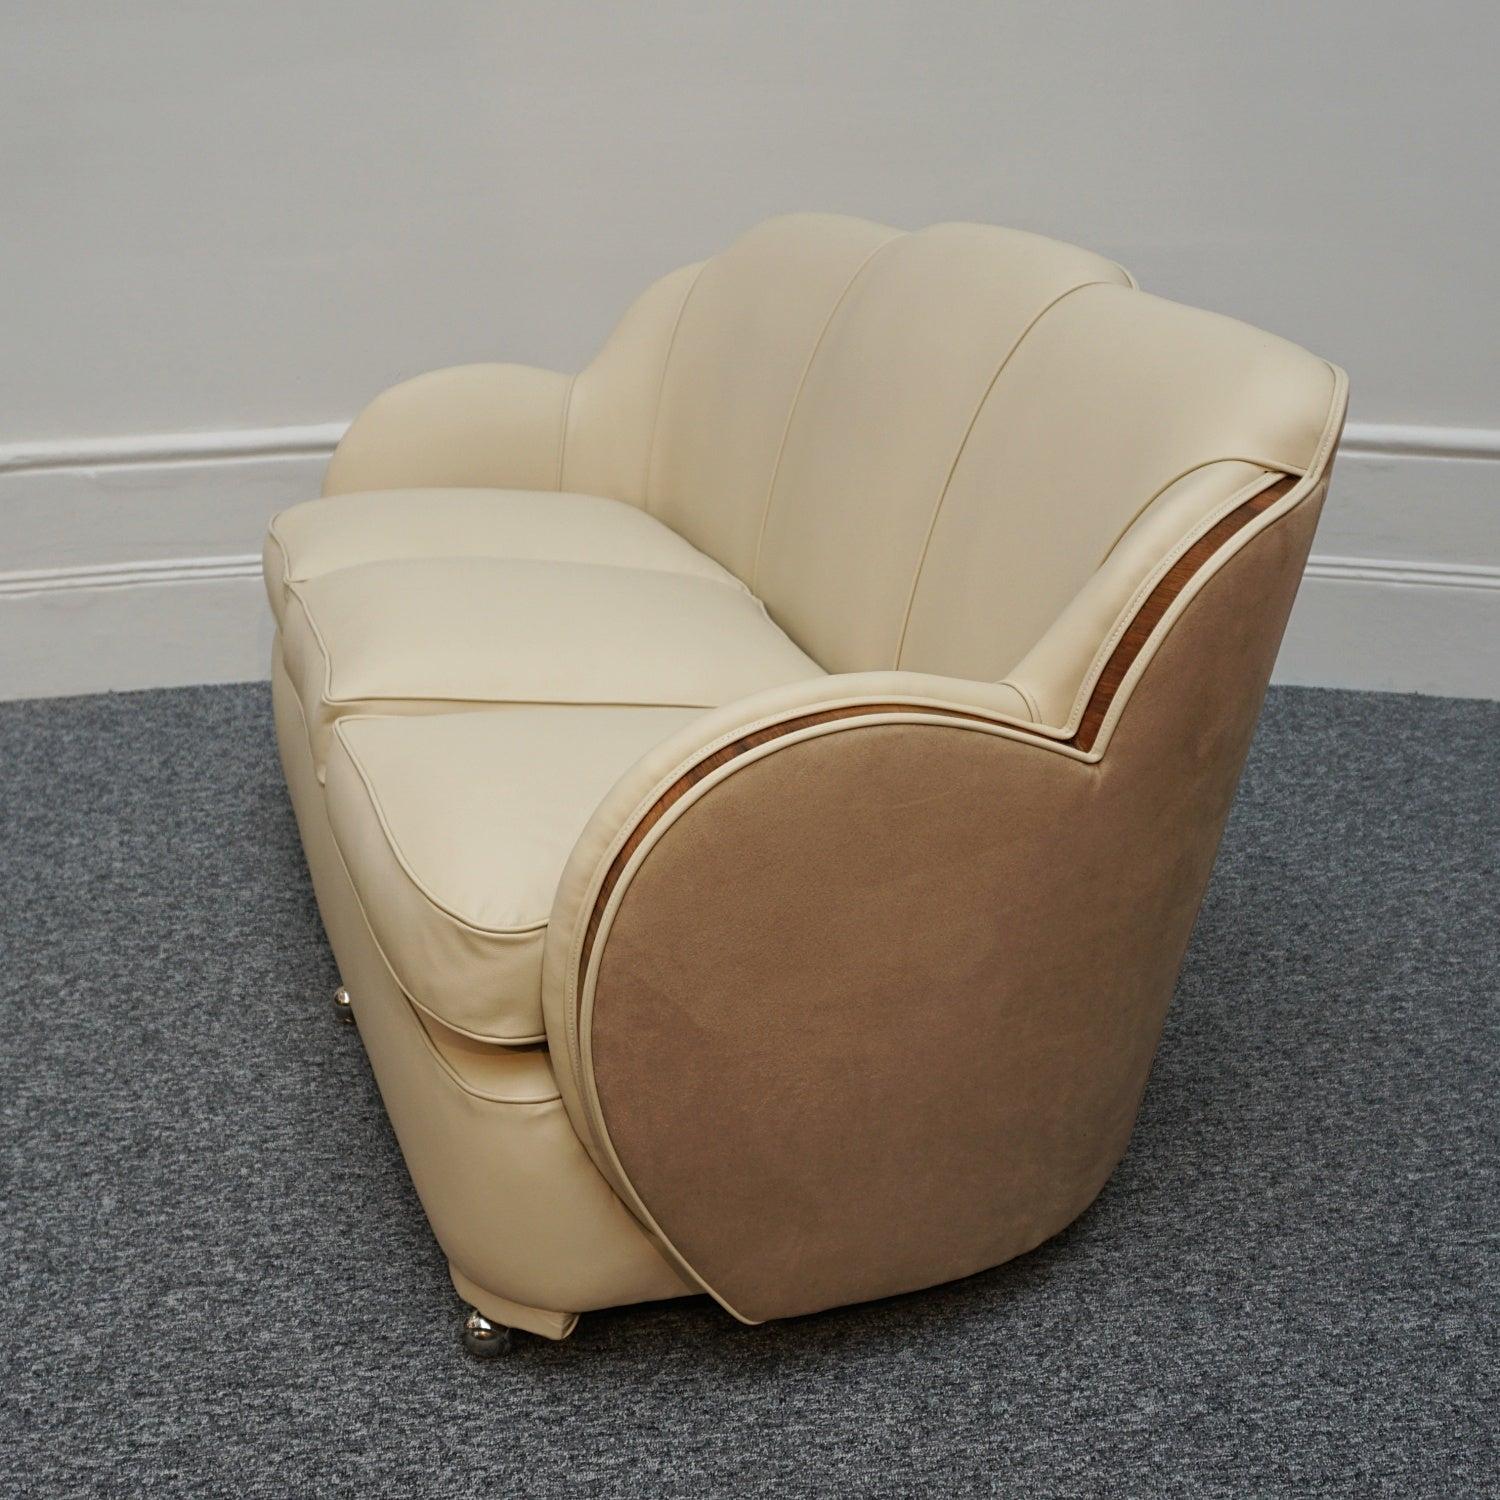 Art Deco Cloud Sofa Re-Upholstered in Cream Leather with Walnut Banding 2